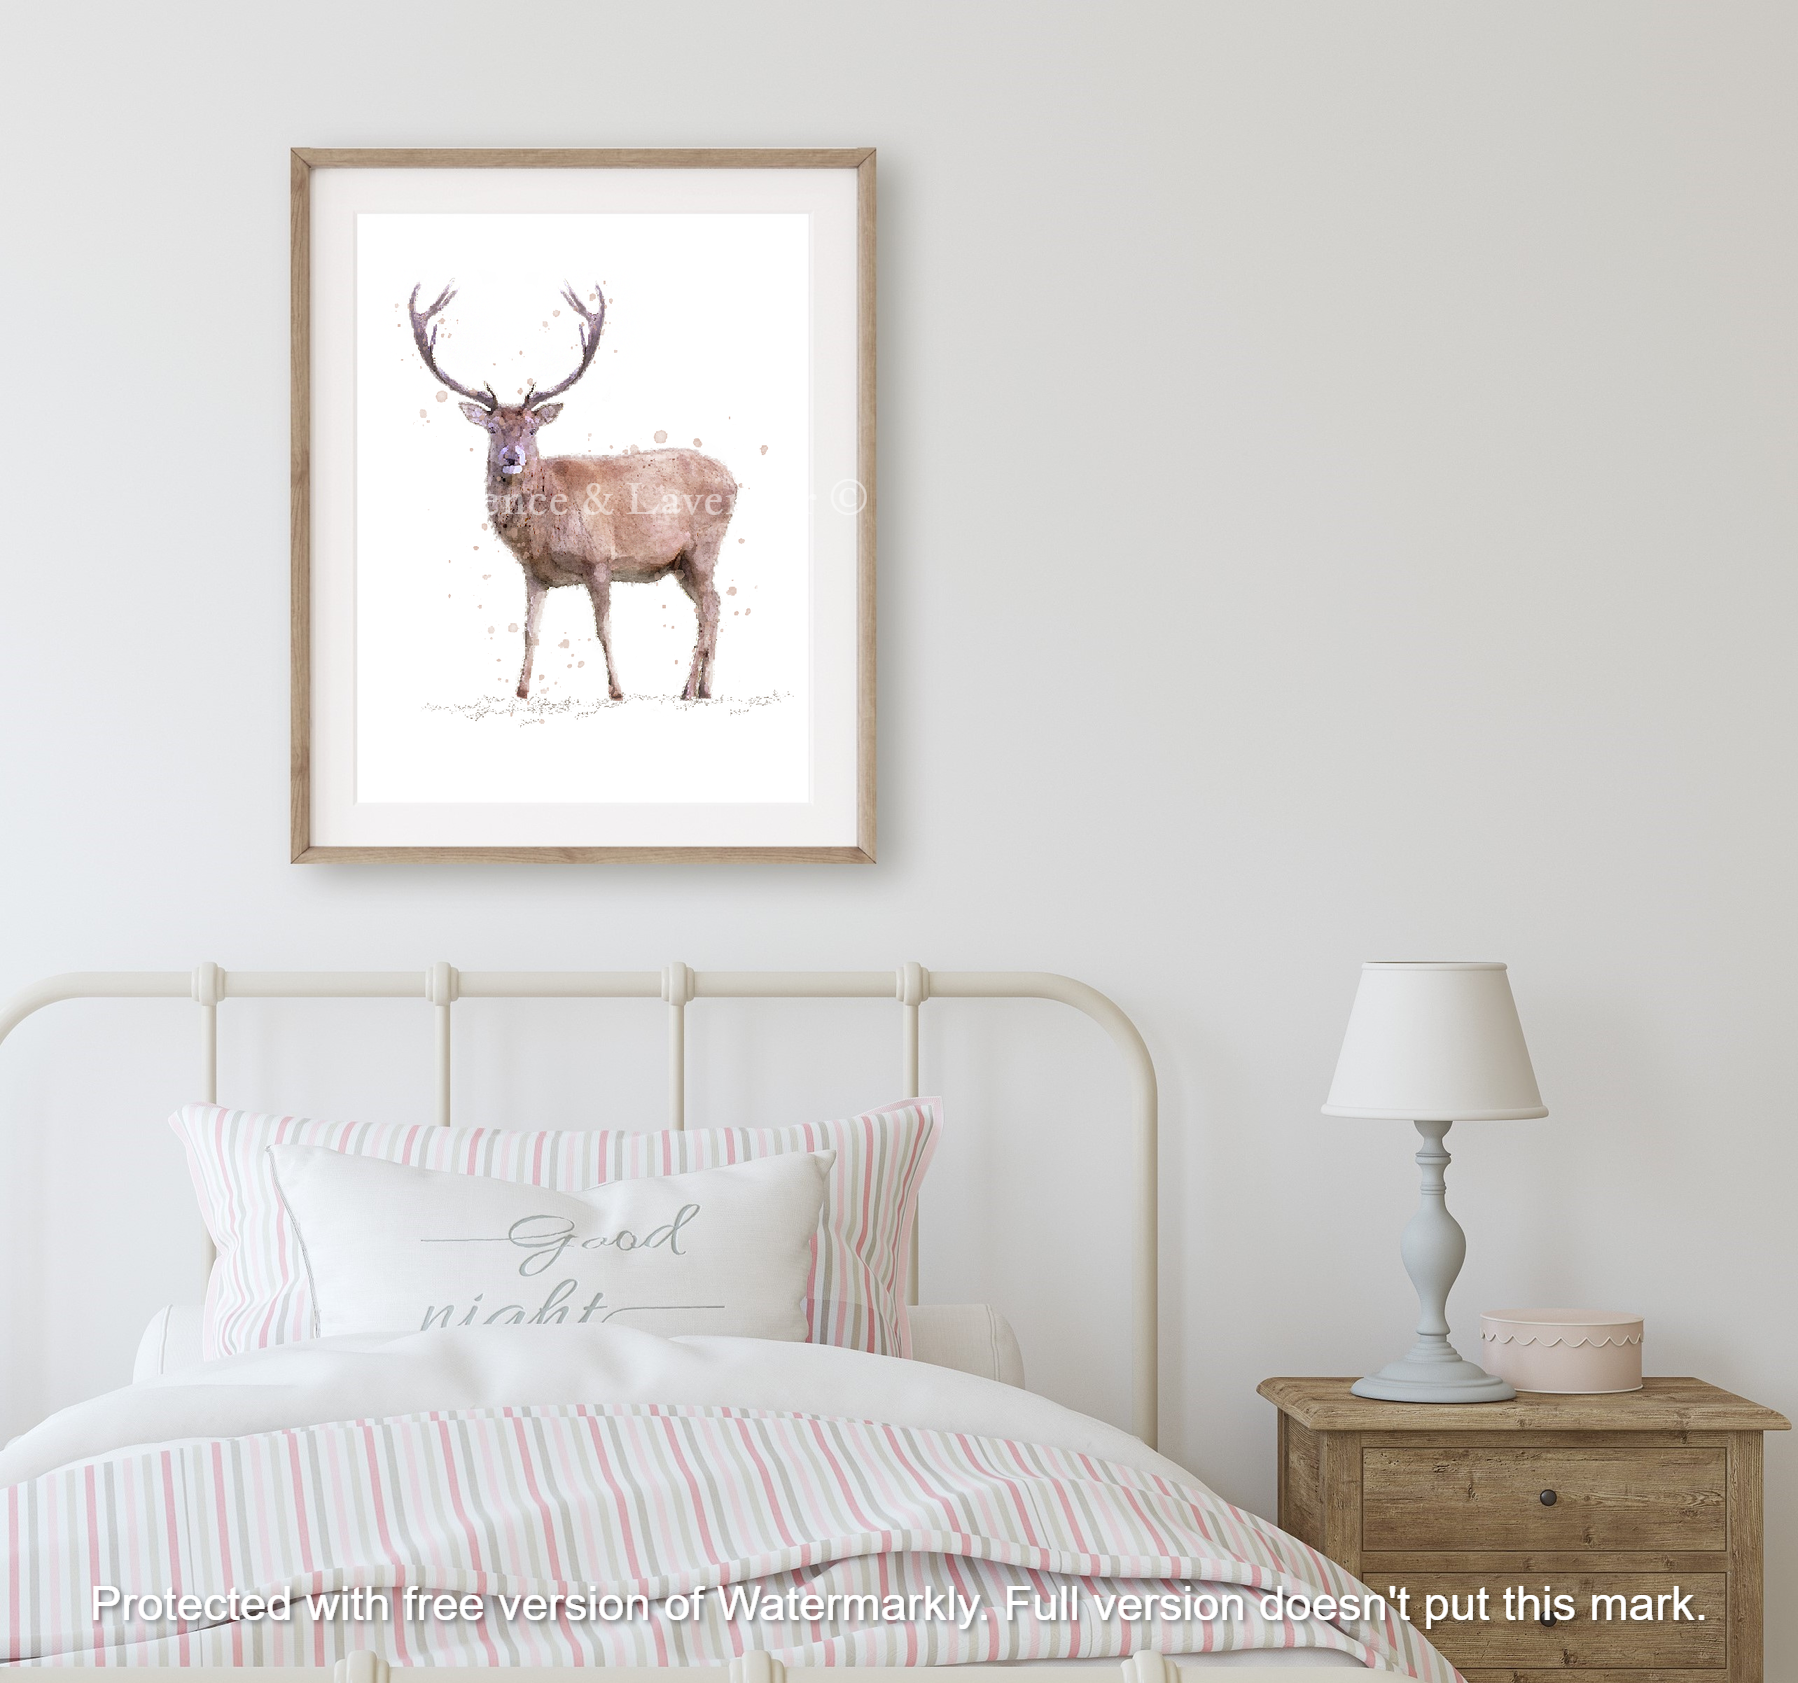 ''Rupert'' - Watercolour Stag Print - Florence & Lavender